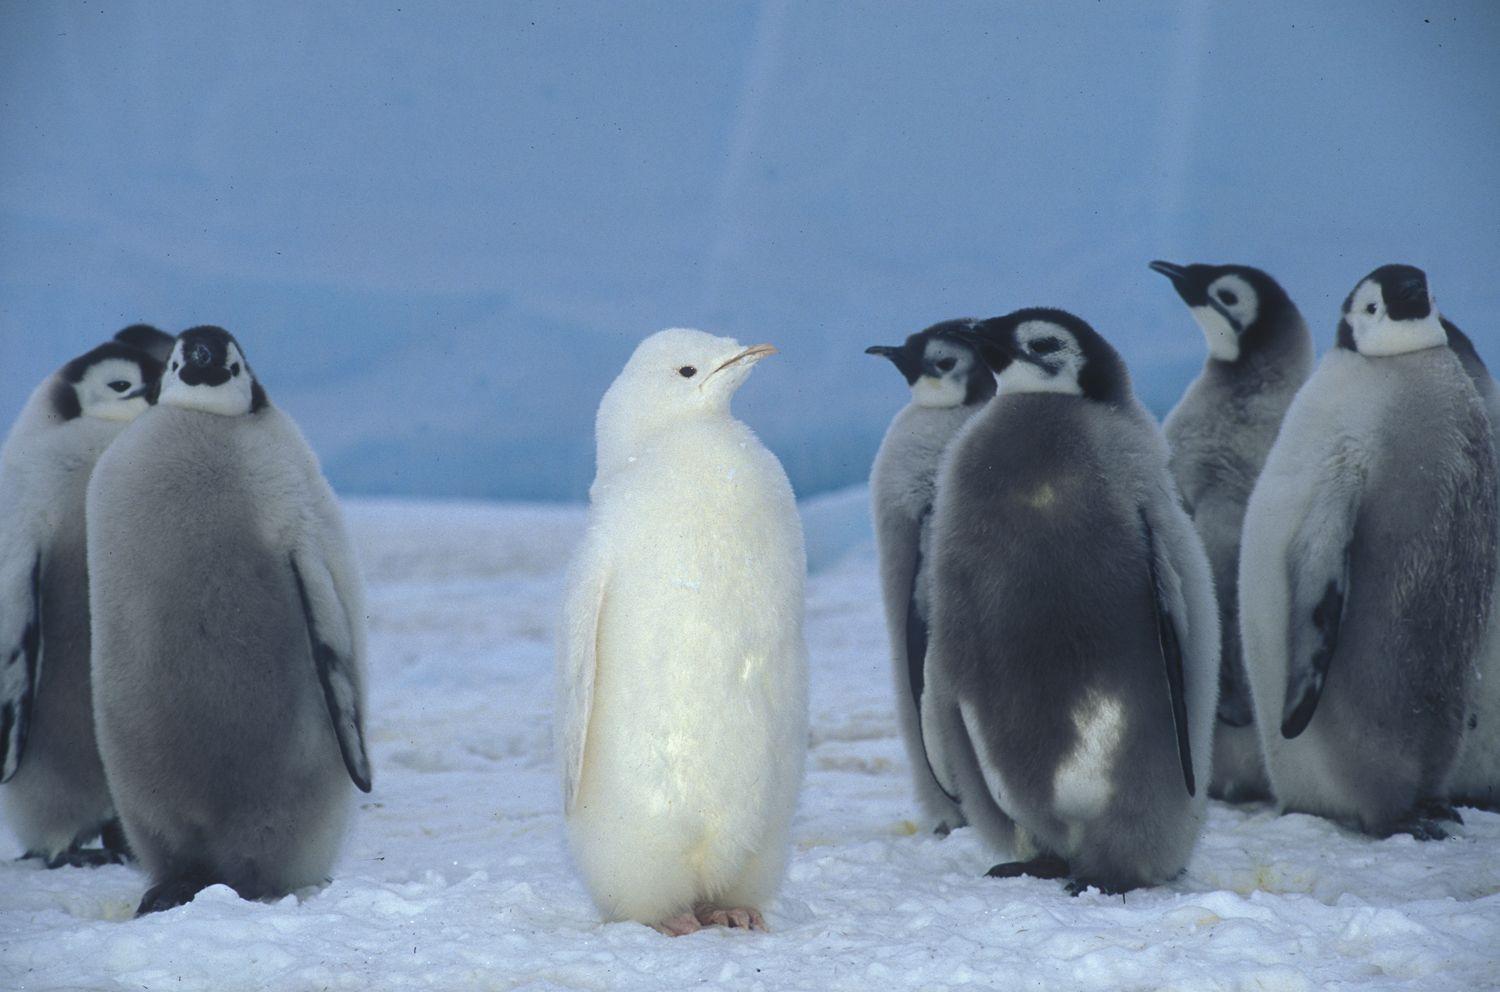 Wild Thing: Discovering the hybrid world of penguins. Johns Hopkins